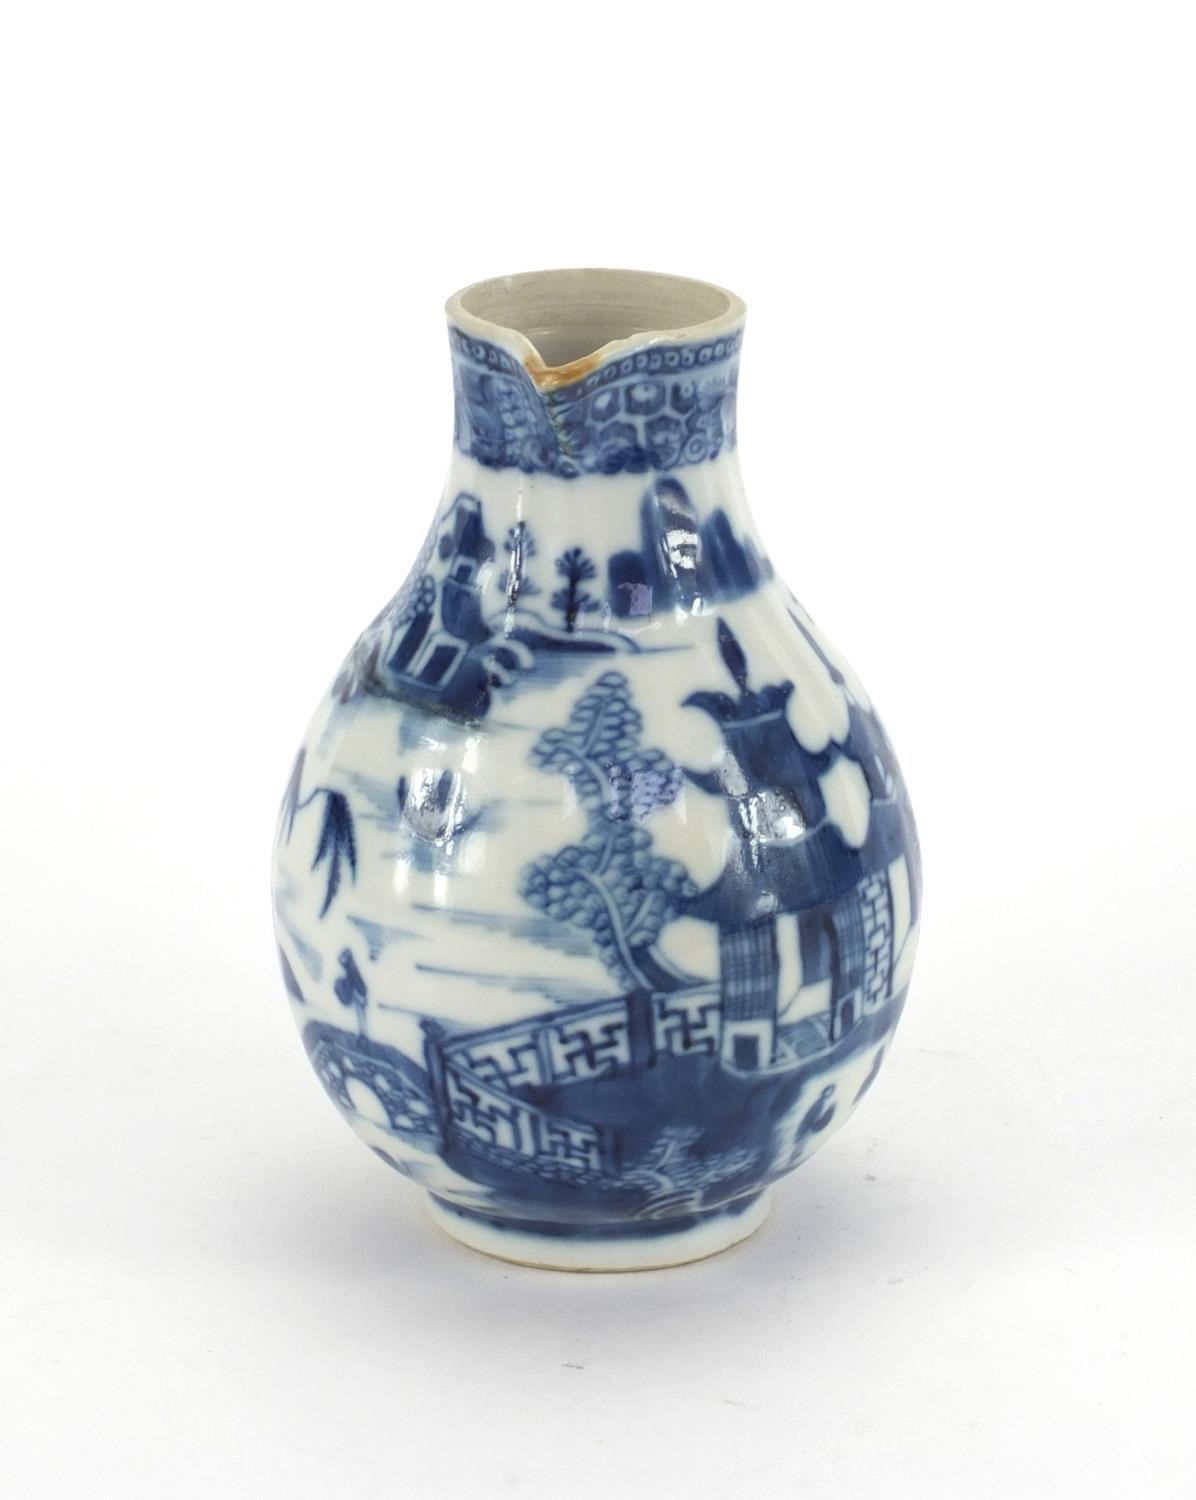 18th century Chinese blue and white porcelain sparrow beak jug, hand painted with willow pattern - Image 5 of 7